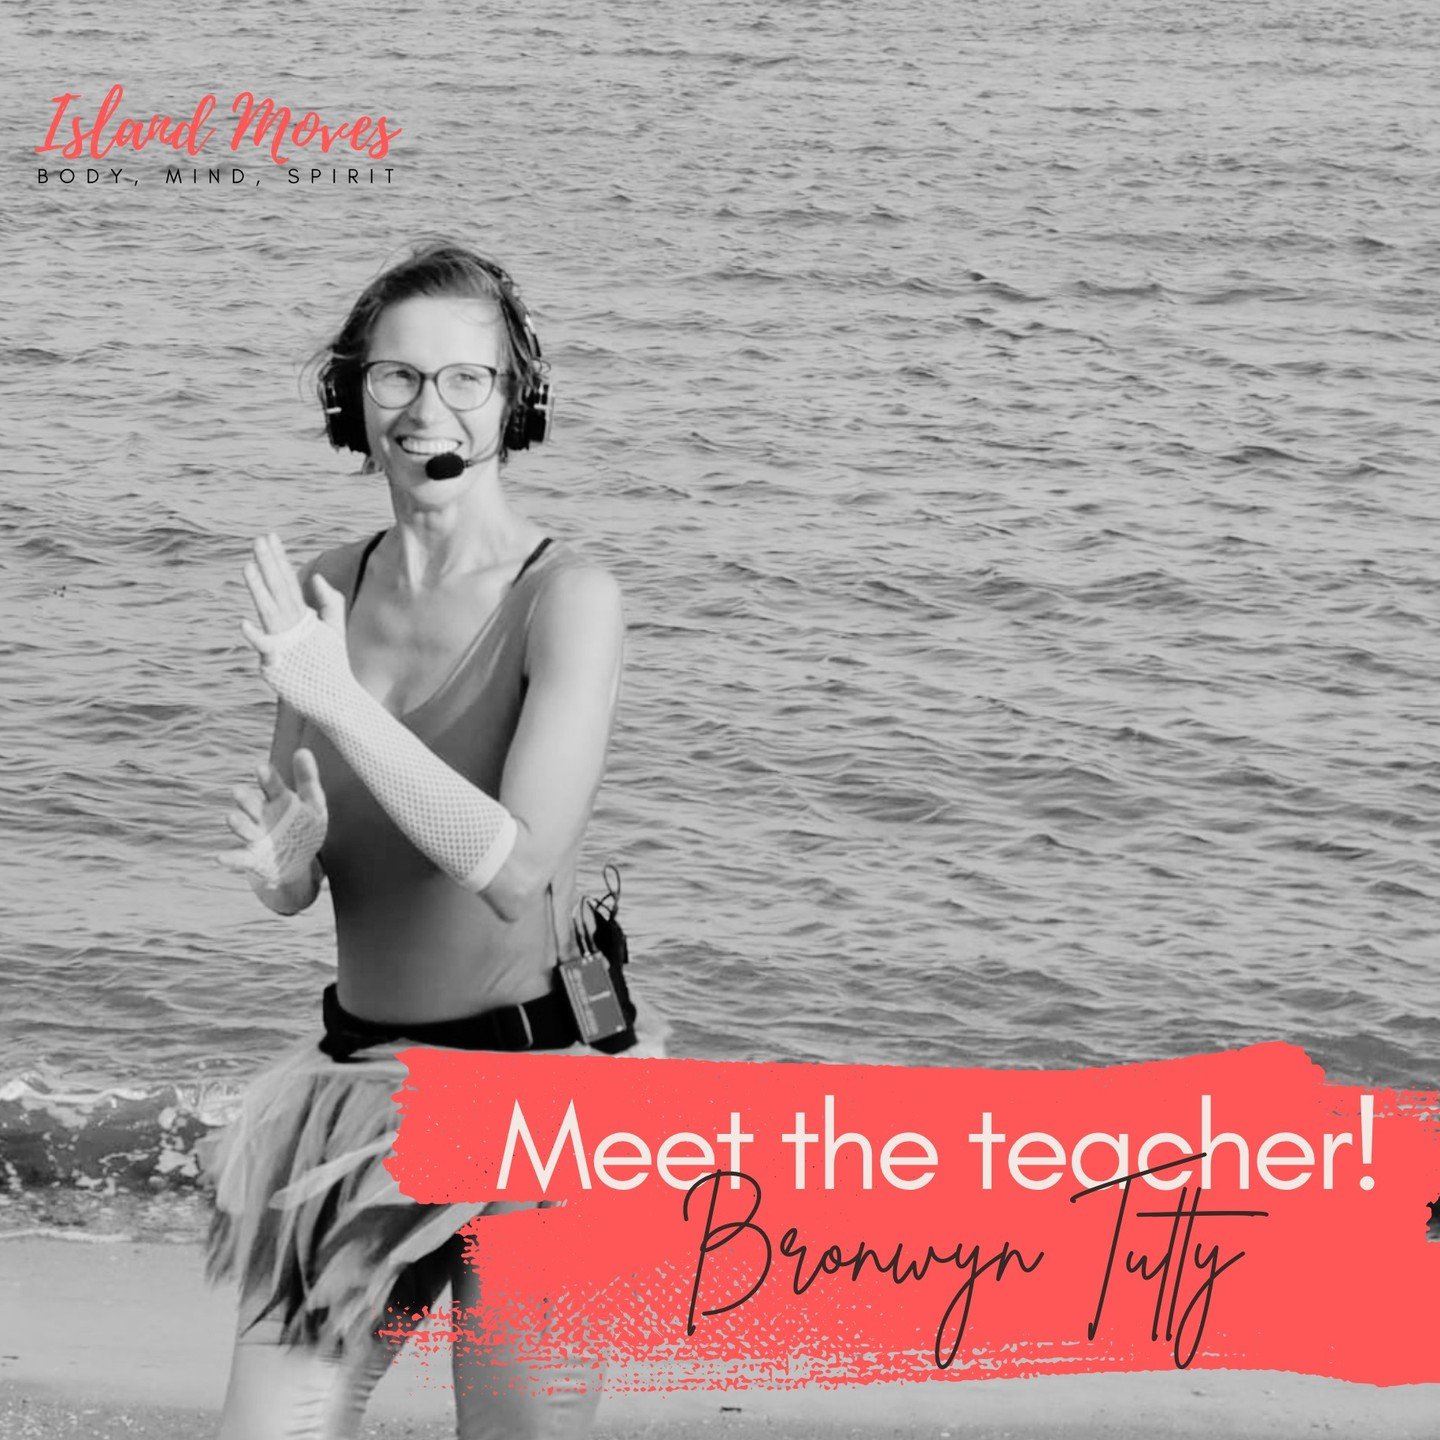 🌟 Meet the teacher: Introducing Bronwyn Tutty! 🌟

Bronwyn, also known as Kiwi Bronwyn, has been living in Burntisland since 2017. She started her Nia journey in 2018 with the White Belt training and has been teaching weekly classes ever since.

In 